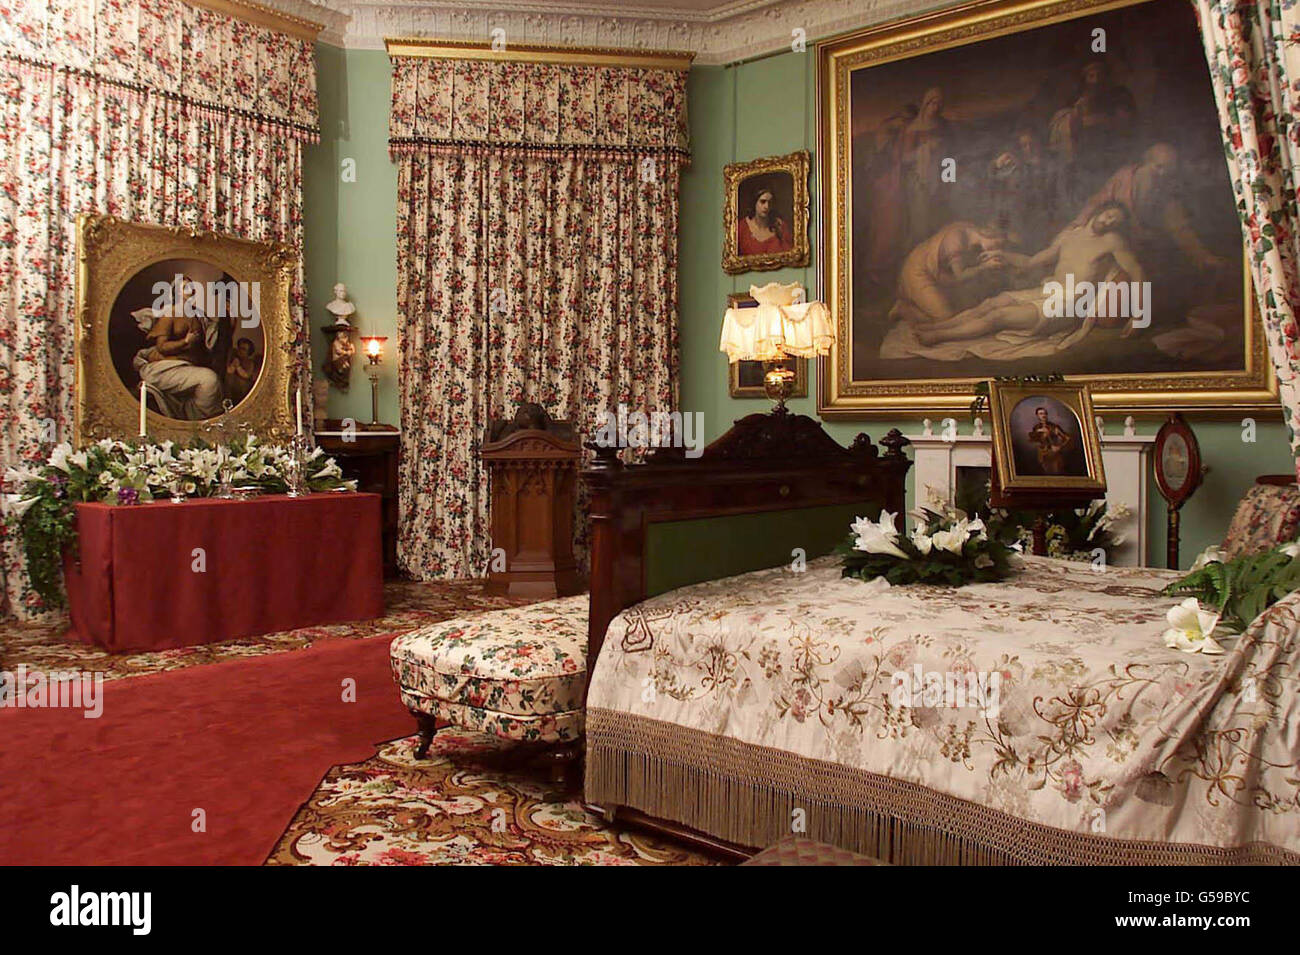 Queen Victoria's bedroom at Osborne House, her home on the Isle of Wight. The room has been recreated as it was after her death there on 22/01/1901, as part of an extensive refurbishment of Osborne House to commemorate a century since her death. * Victoria was Britain's longest reinging monarch. The bed is decorated with lillies and palms. An alter is set up on the opposite side of the room in the same way as done so by her children to mourn her with effigies of both Victoria and Albert. Most of the items are from the Royal Collection. Stock Photo